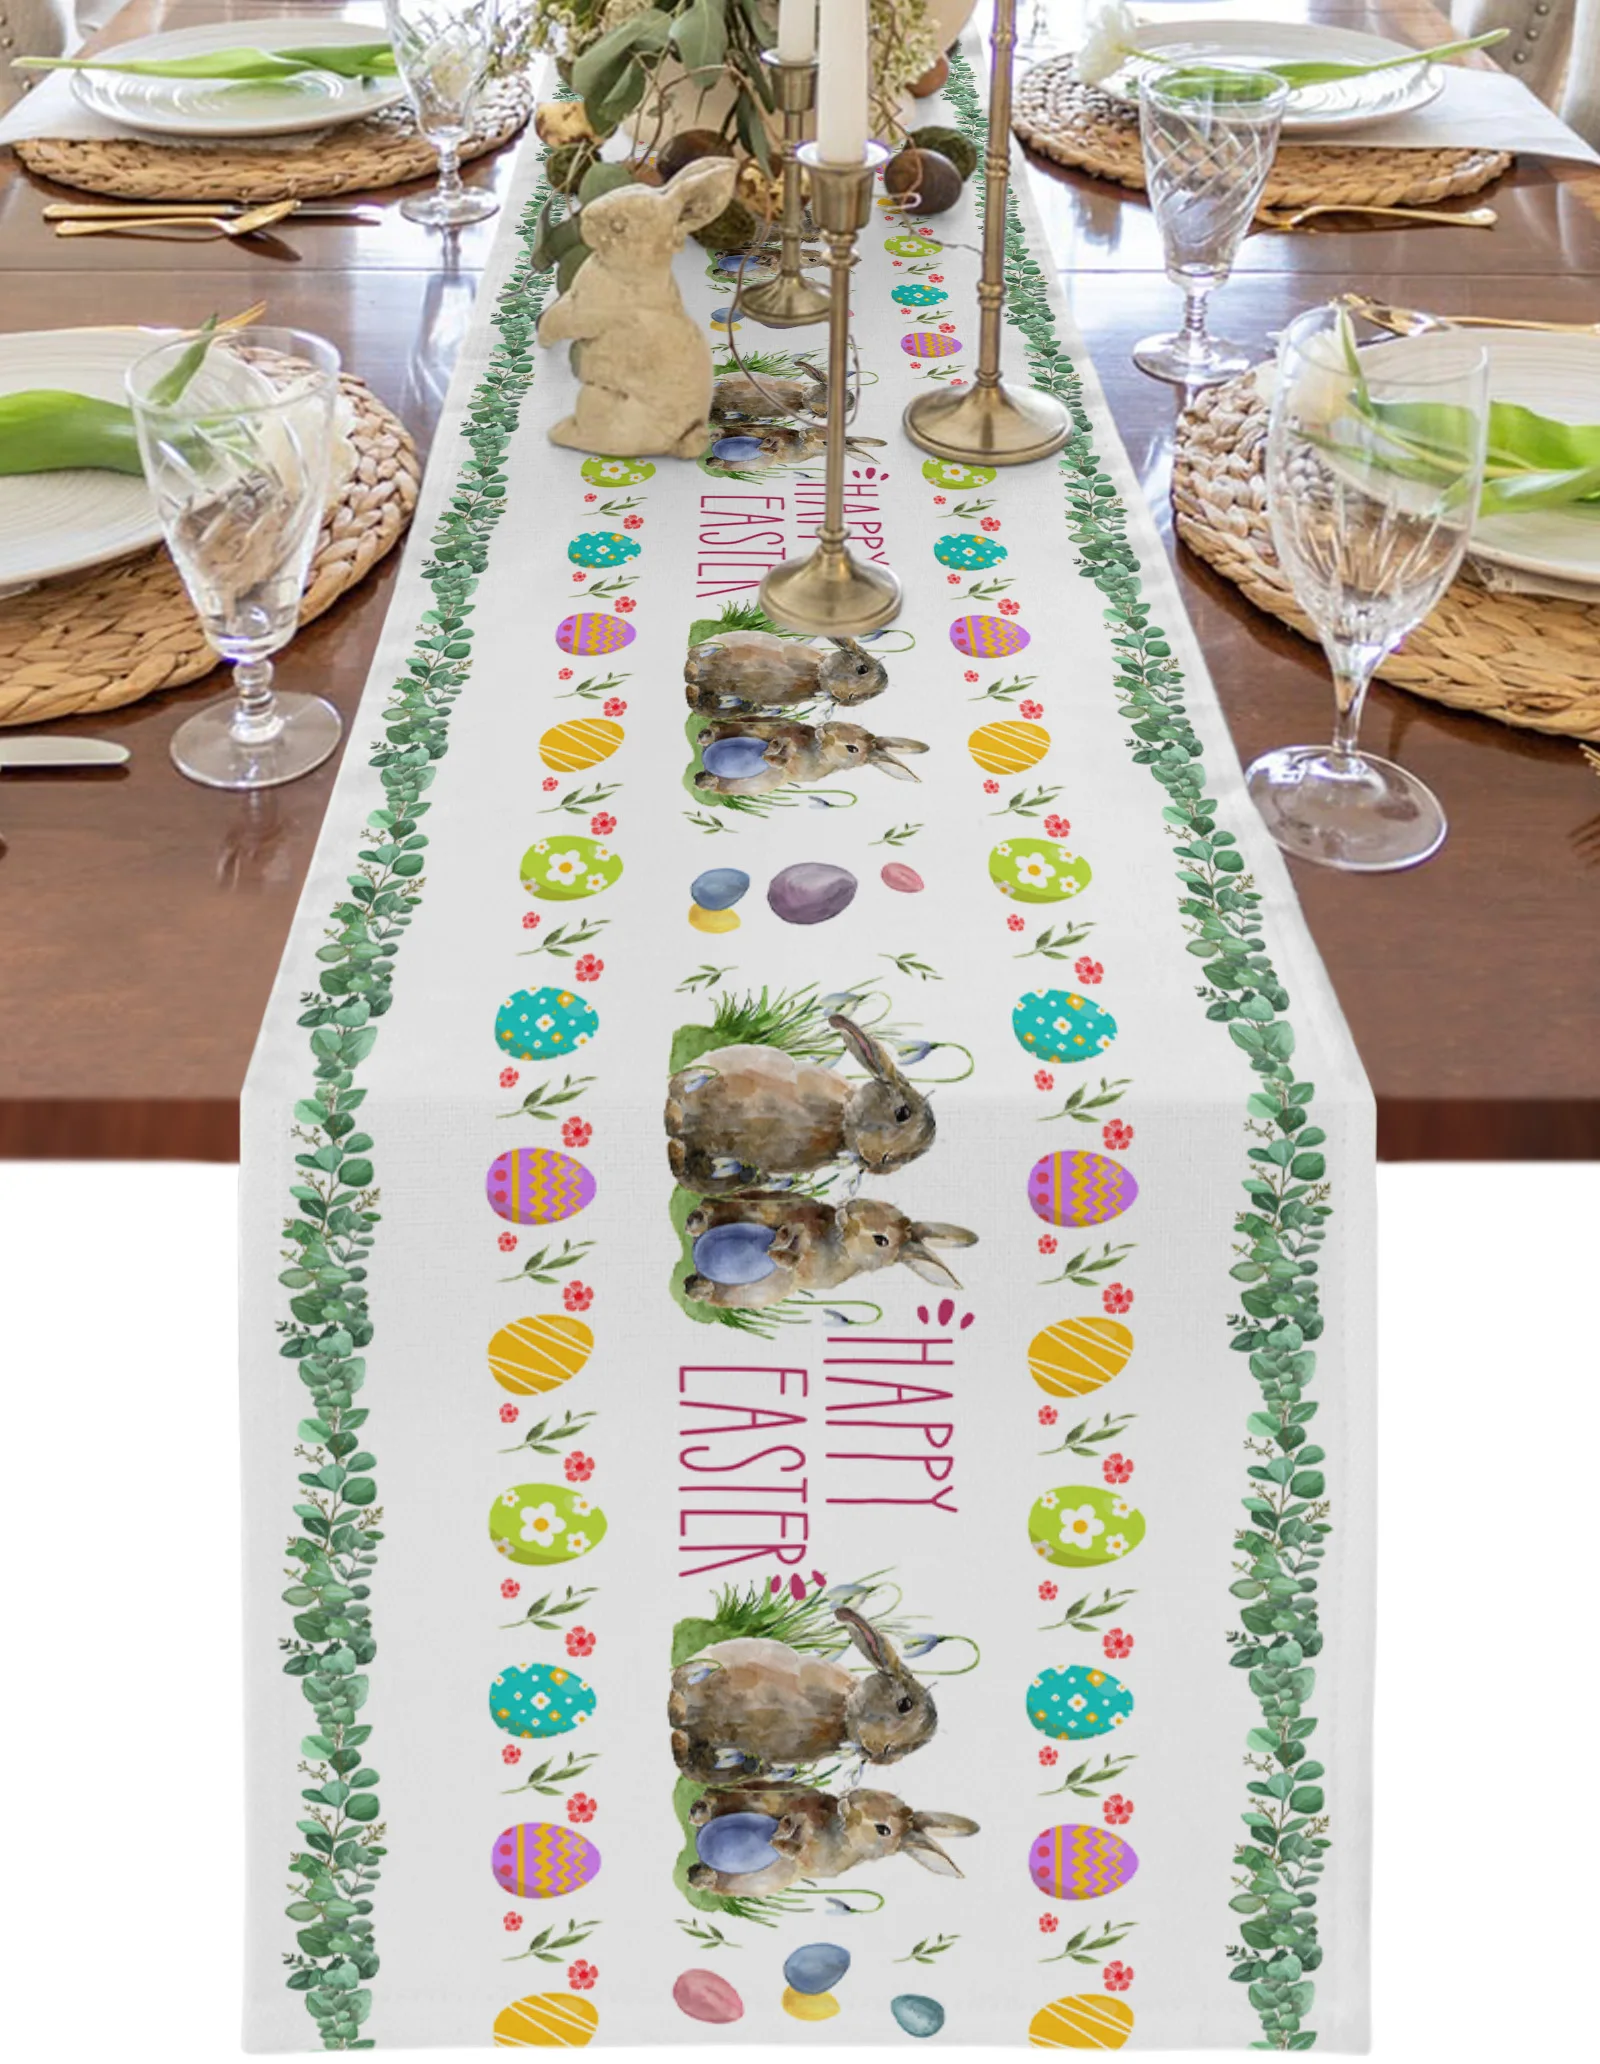 

Easter Watercolor Egg Rabbit Plant Table Runner Wedding Party Table Decorations for Home Decor Gift Favor Placemat Tablecloth